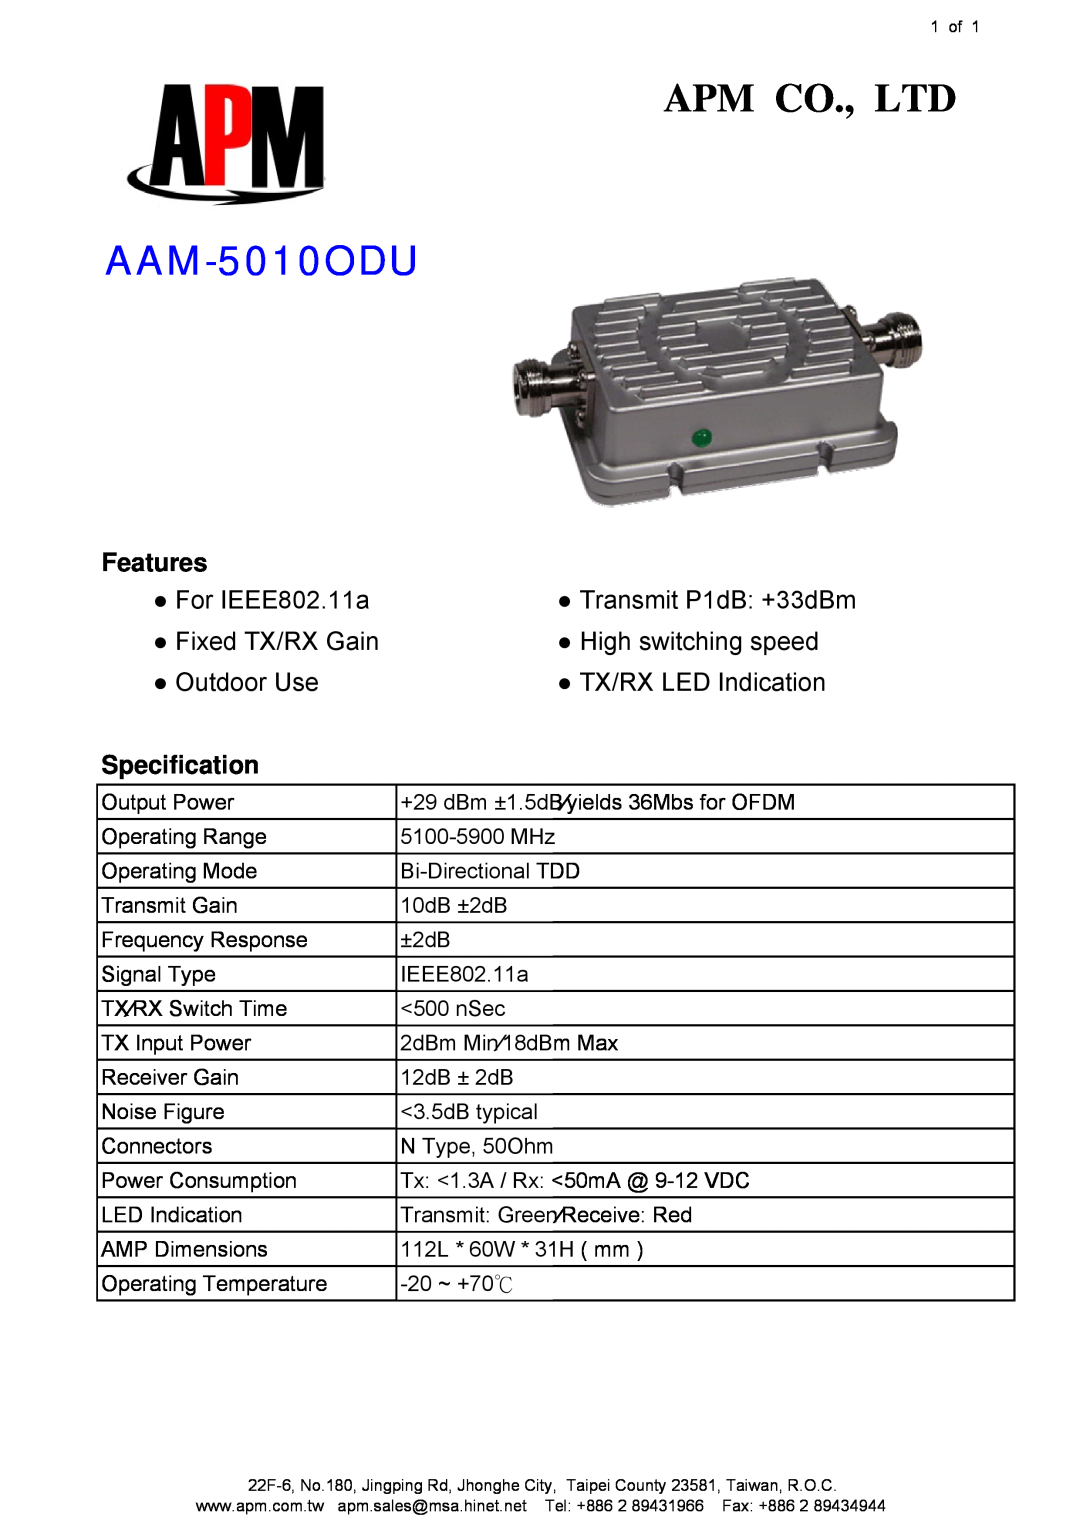 APM AAM-5010ODU dimensions Features, For IEEE802.11a, Fixed TX/RX Gain, High switching speed, Outdoor Use, Specification 